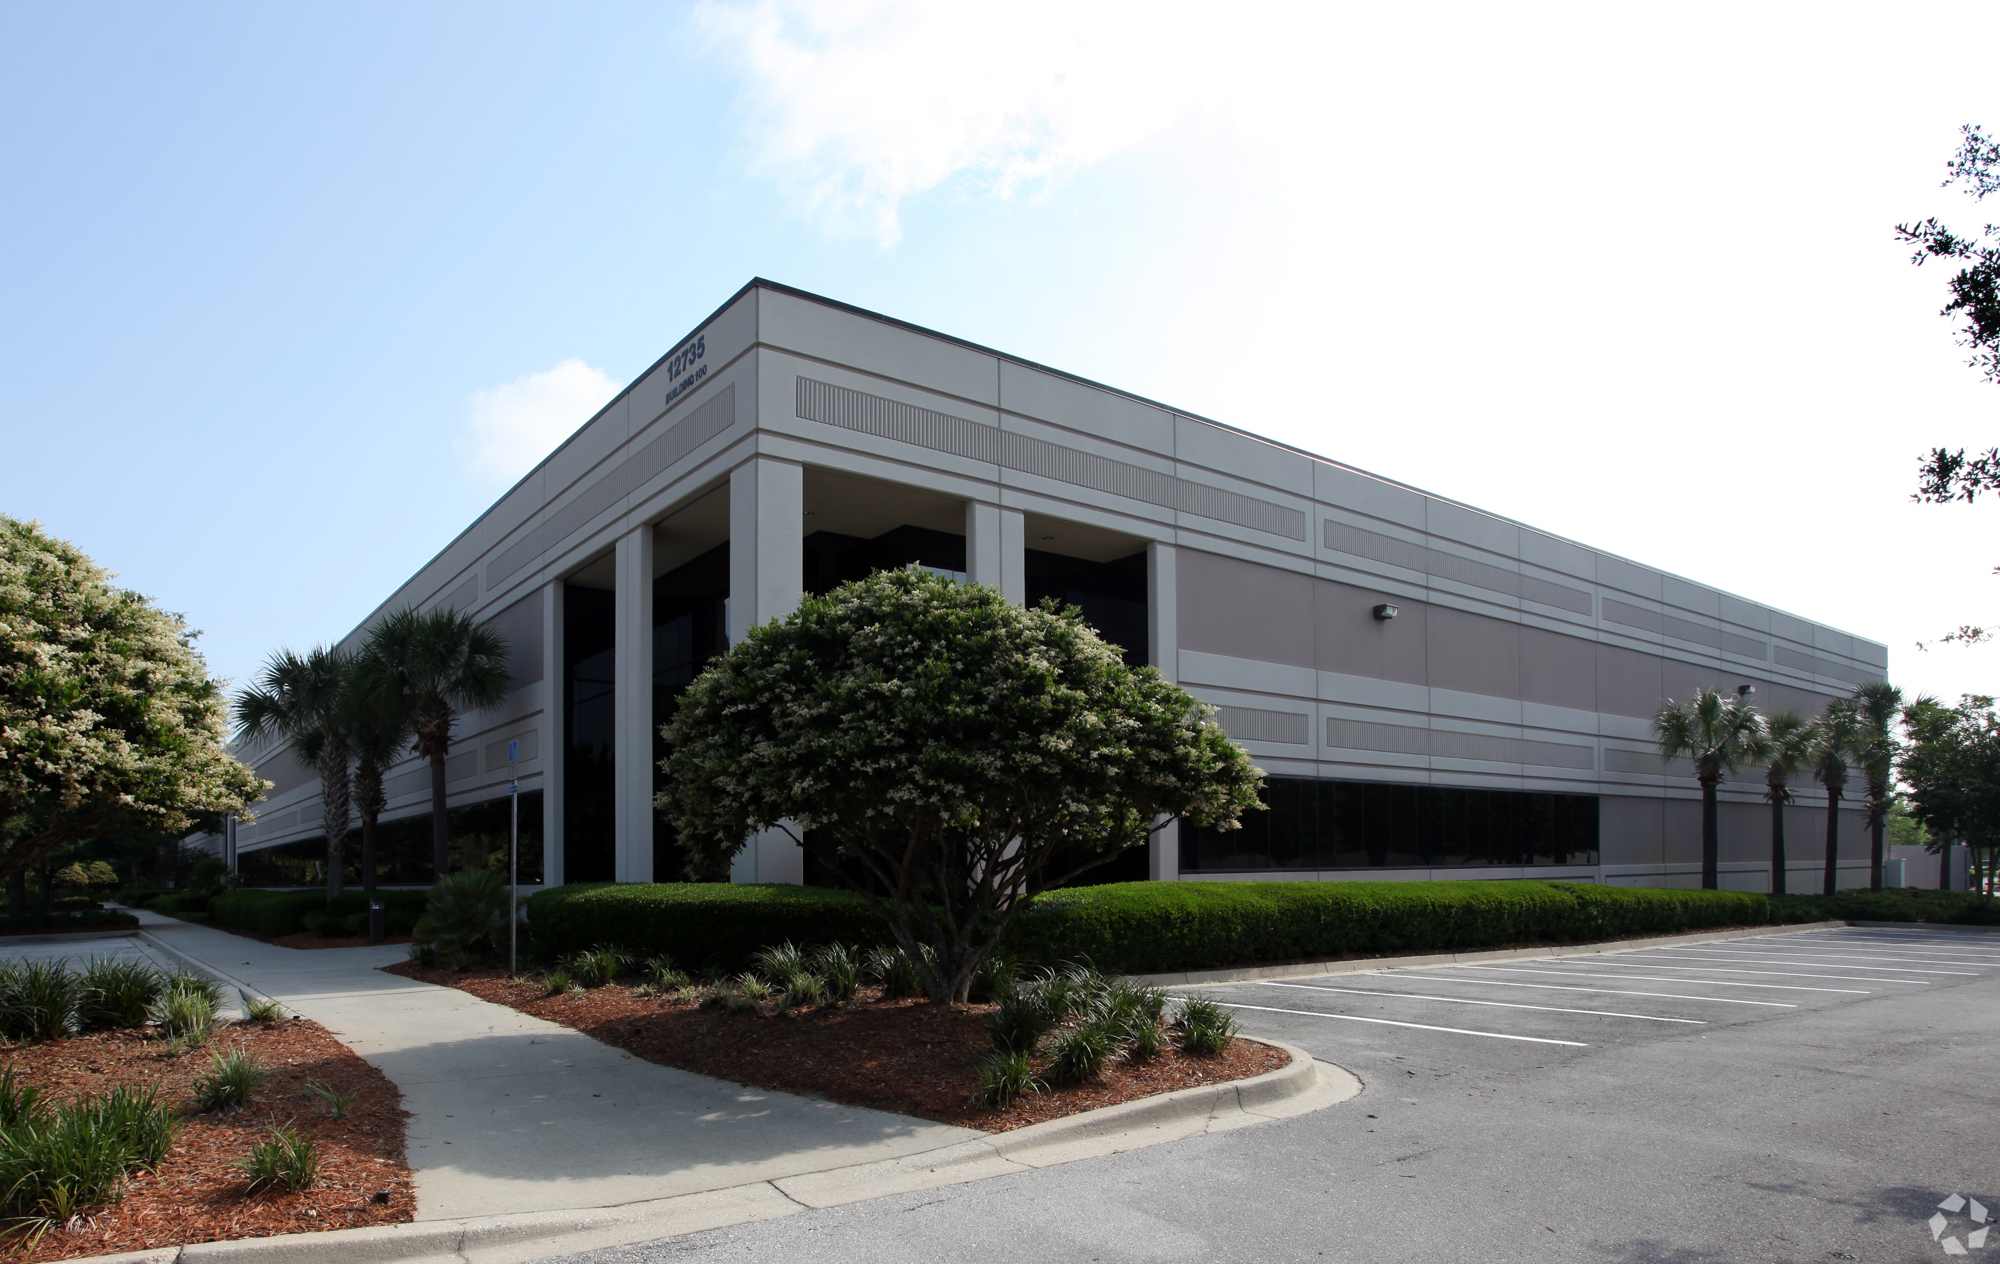 Beeline is moving into the former Bombardier Capital Inc. space at Flagler Center. A second-floor mezzanine was removed, creating high ceilings.